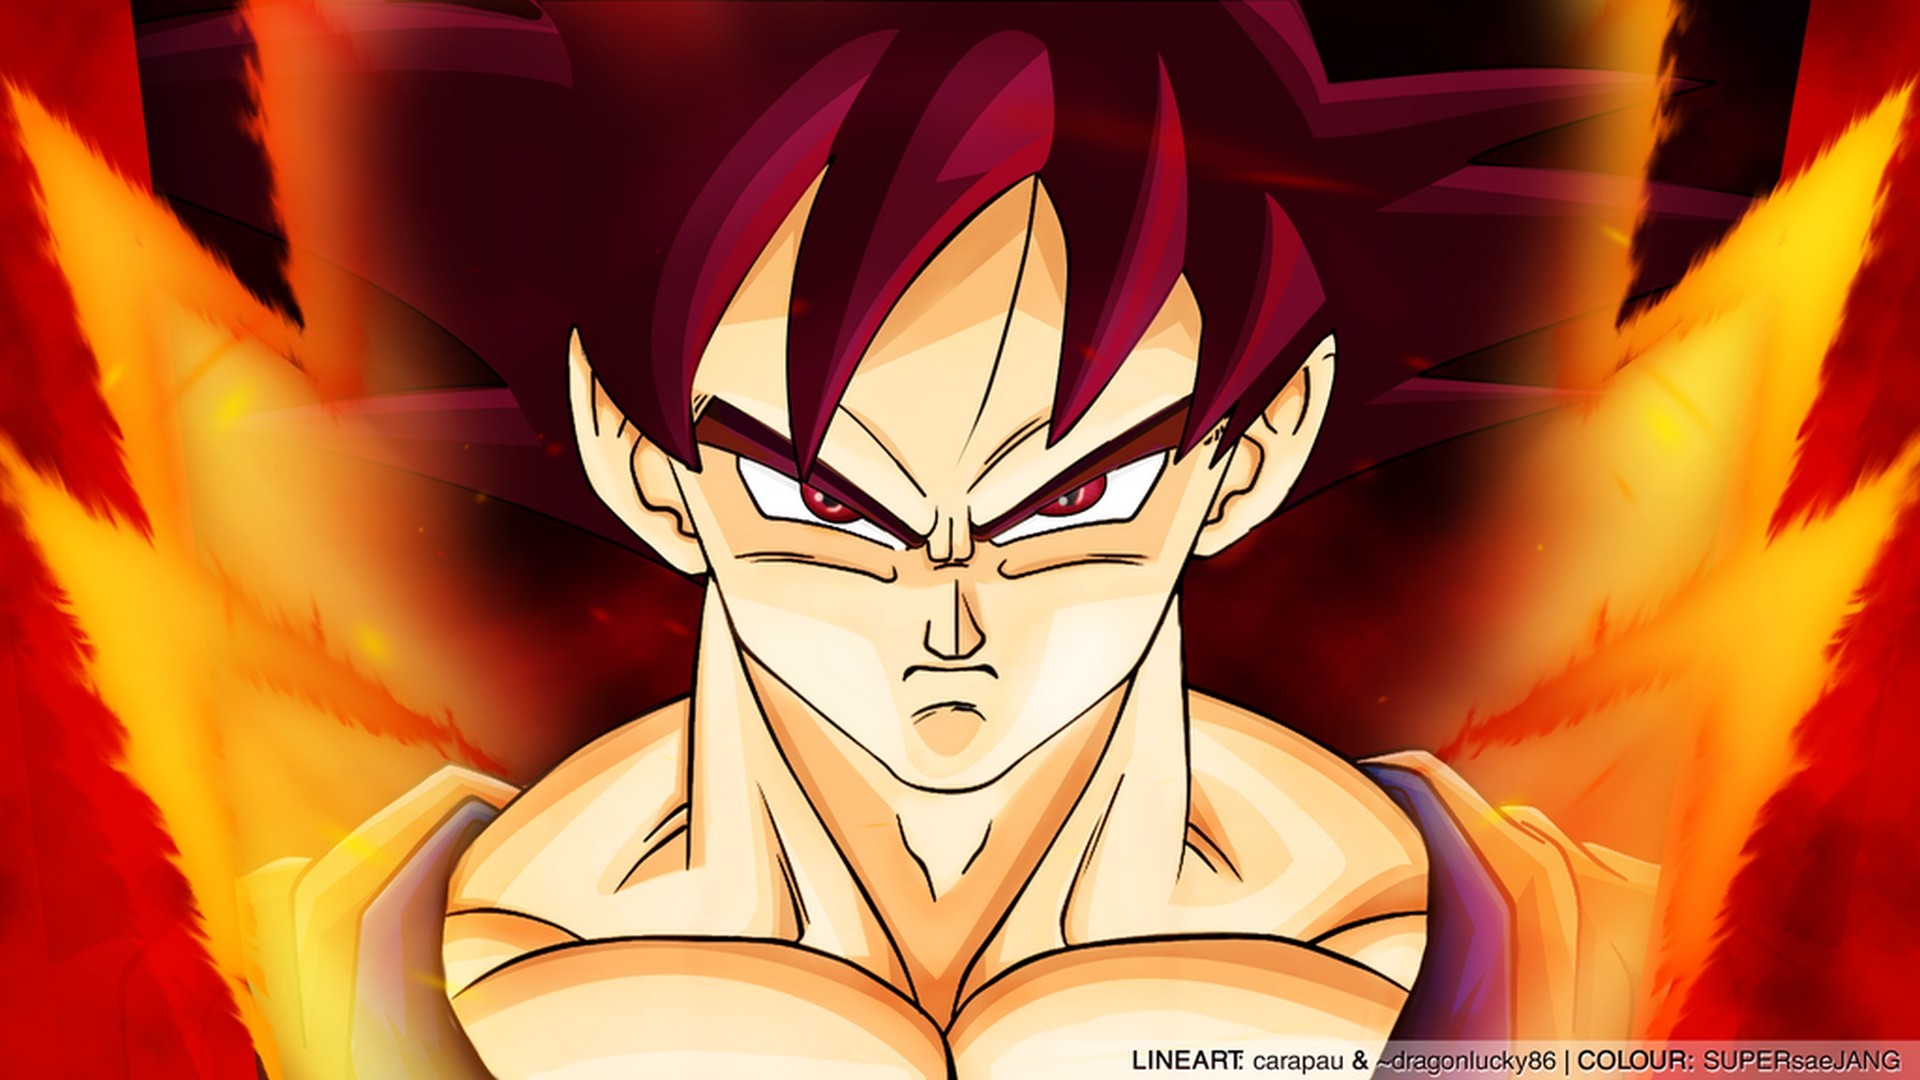 Goku Super Saiyan God Wallpaper HD with image resolution 1920x1080 pixel. You can make this wallpaper for your Desktop Computer Backgrounds, Mac Wallpapers, Android Lock screen or iPhone Screensavers